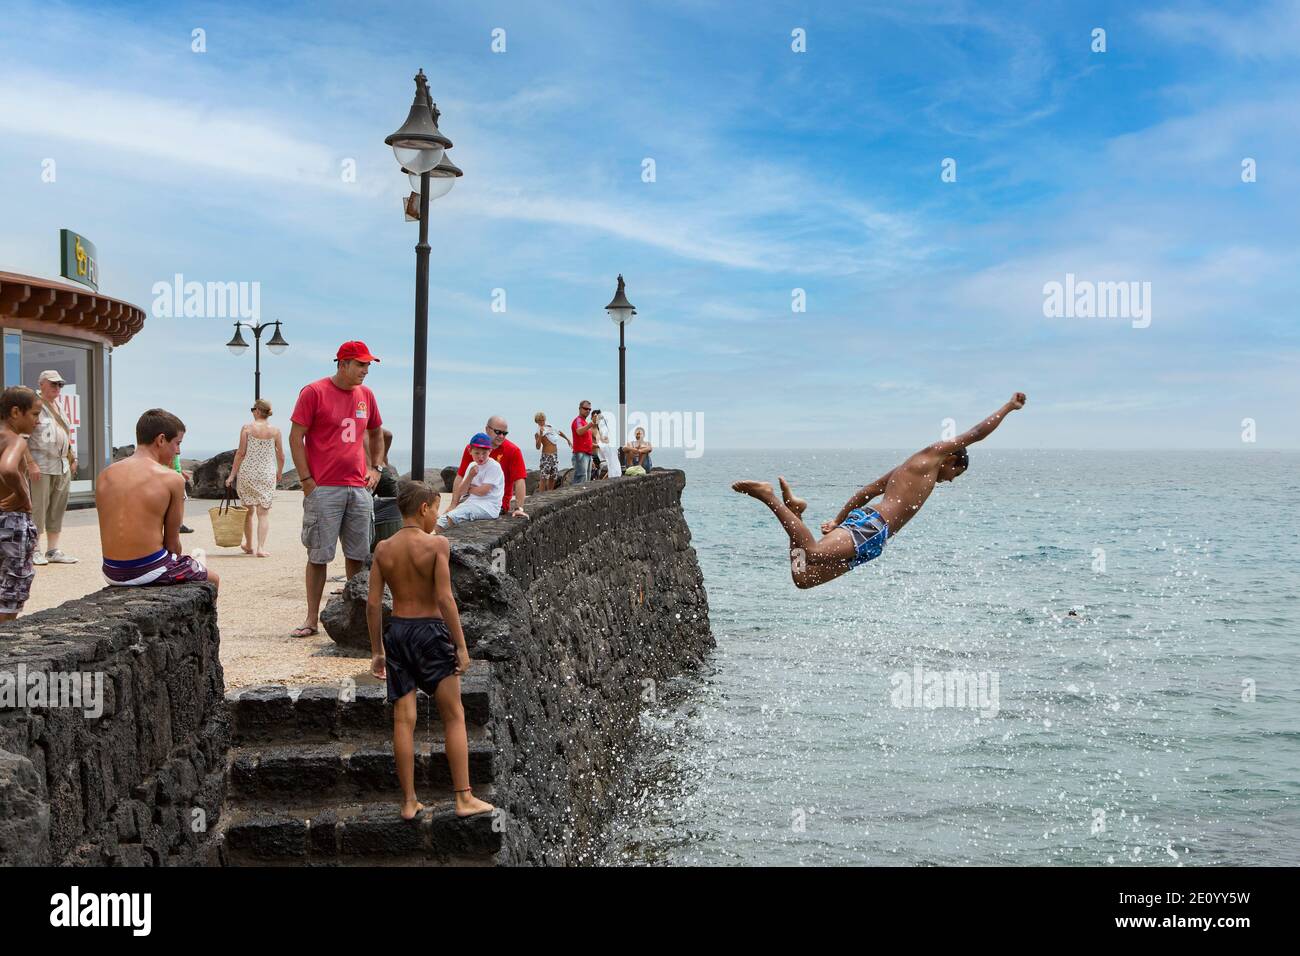 Boy jumps into the sea from the quay wall with Superman gesture Stock Photo